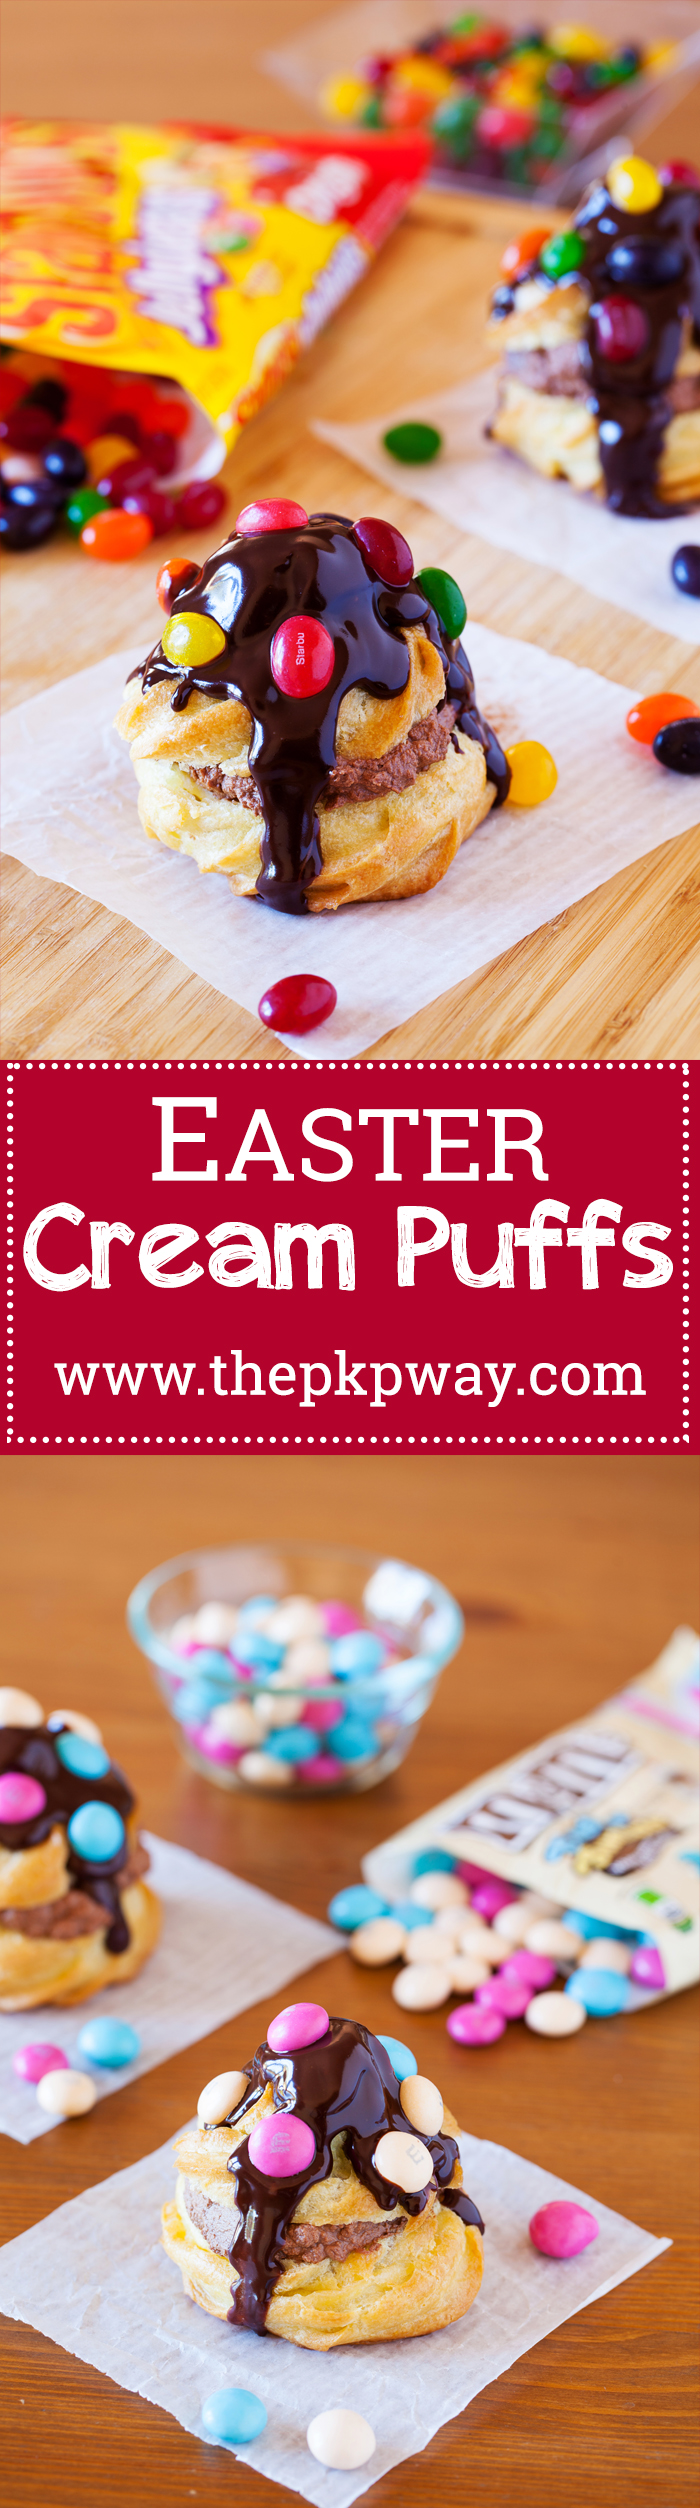 Fun yet elegant French cream puffs to add a little flare to your Easter table. #ad #SweeterEaster